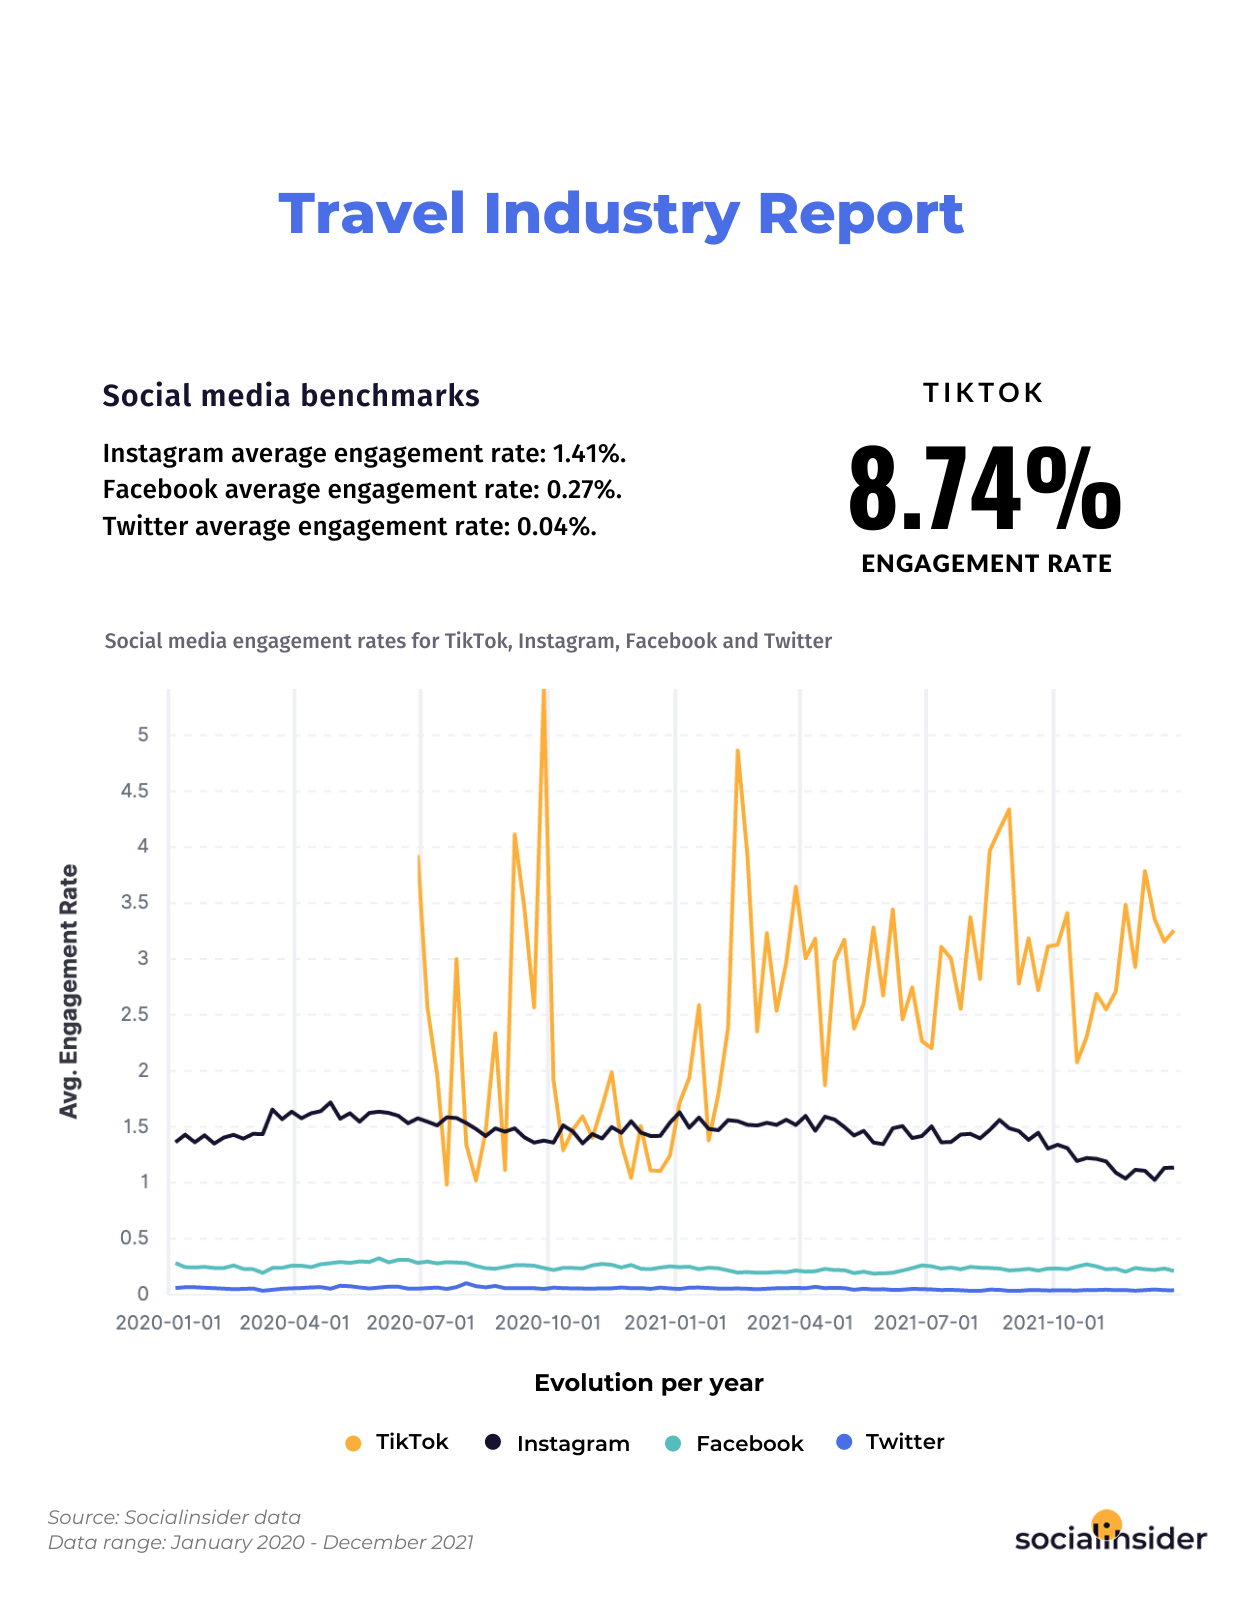 Engagement rates for the travel industry for 2022